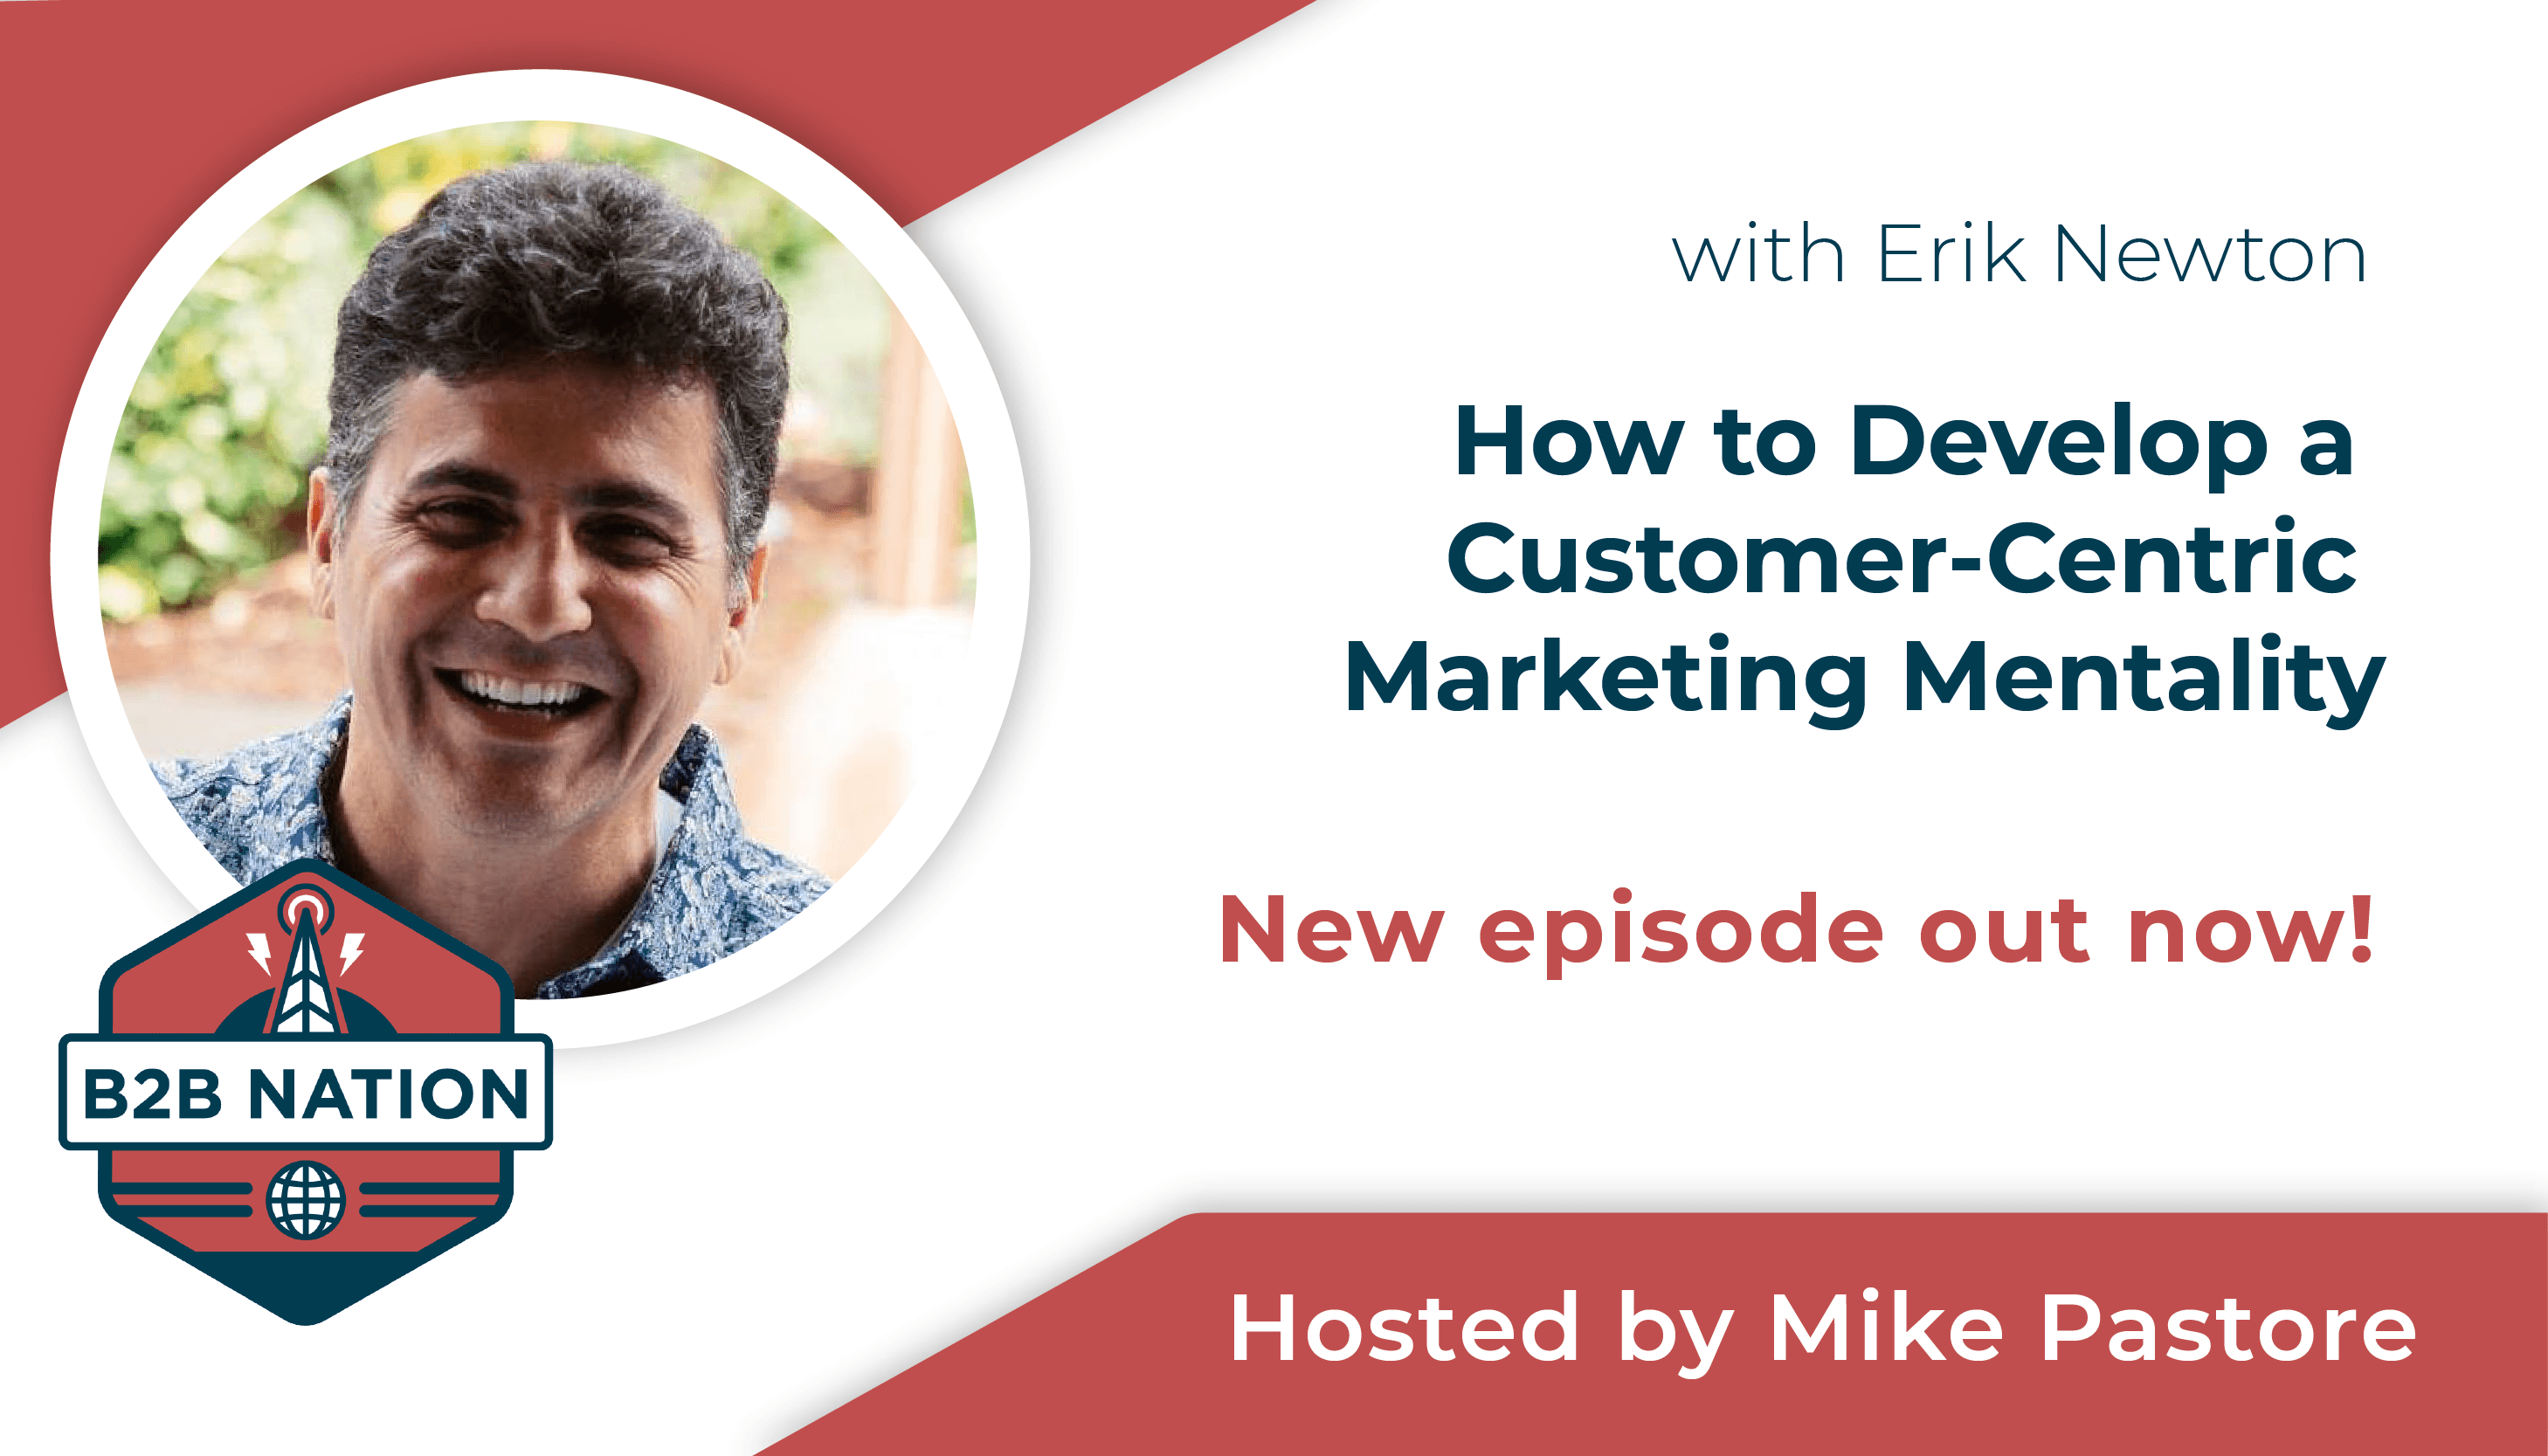 How to Develop a Customer-Centric Marketing Mentality